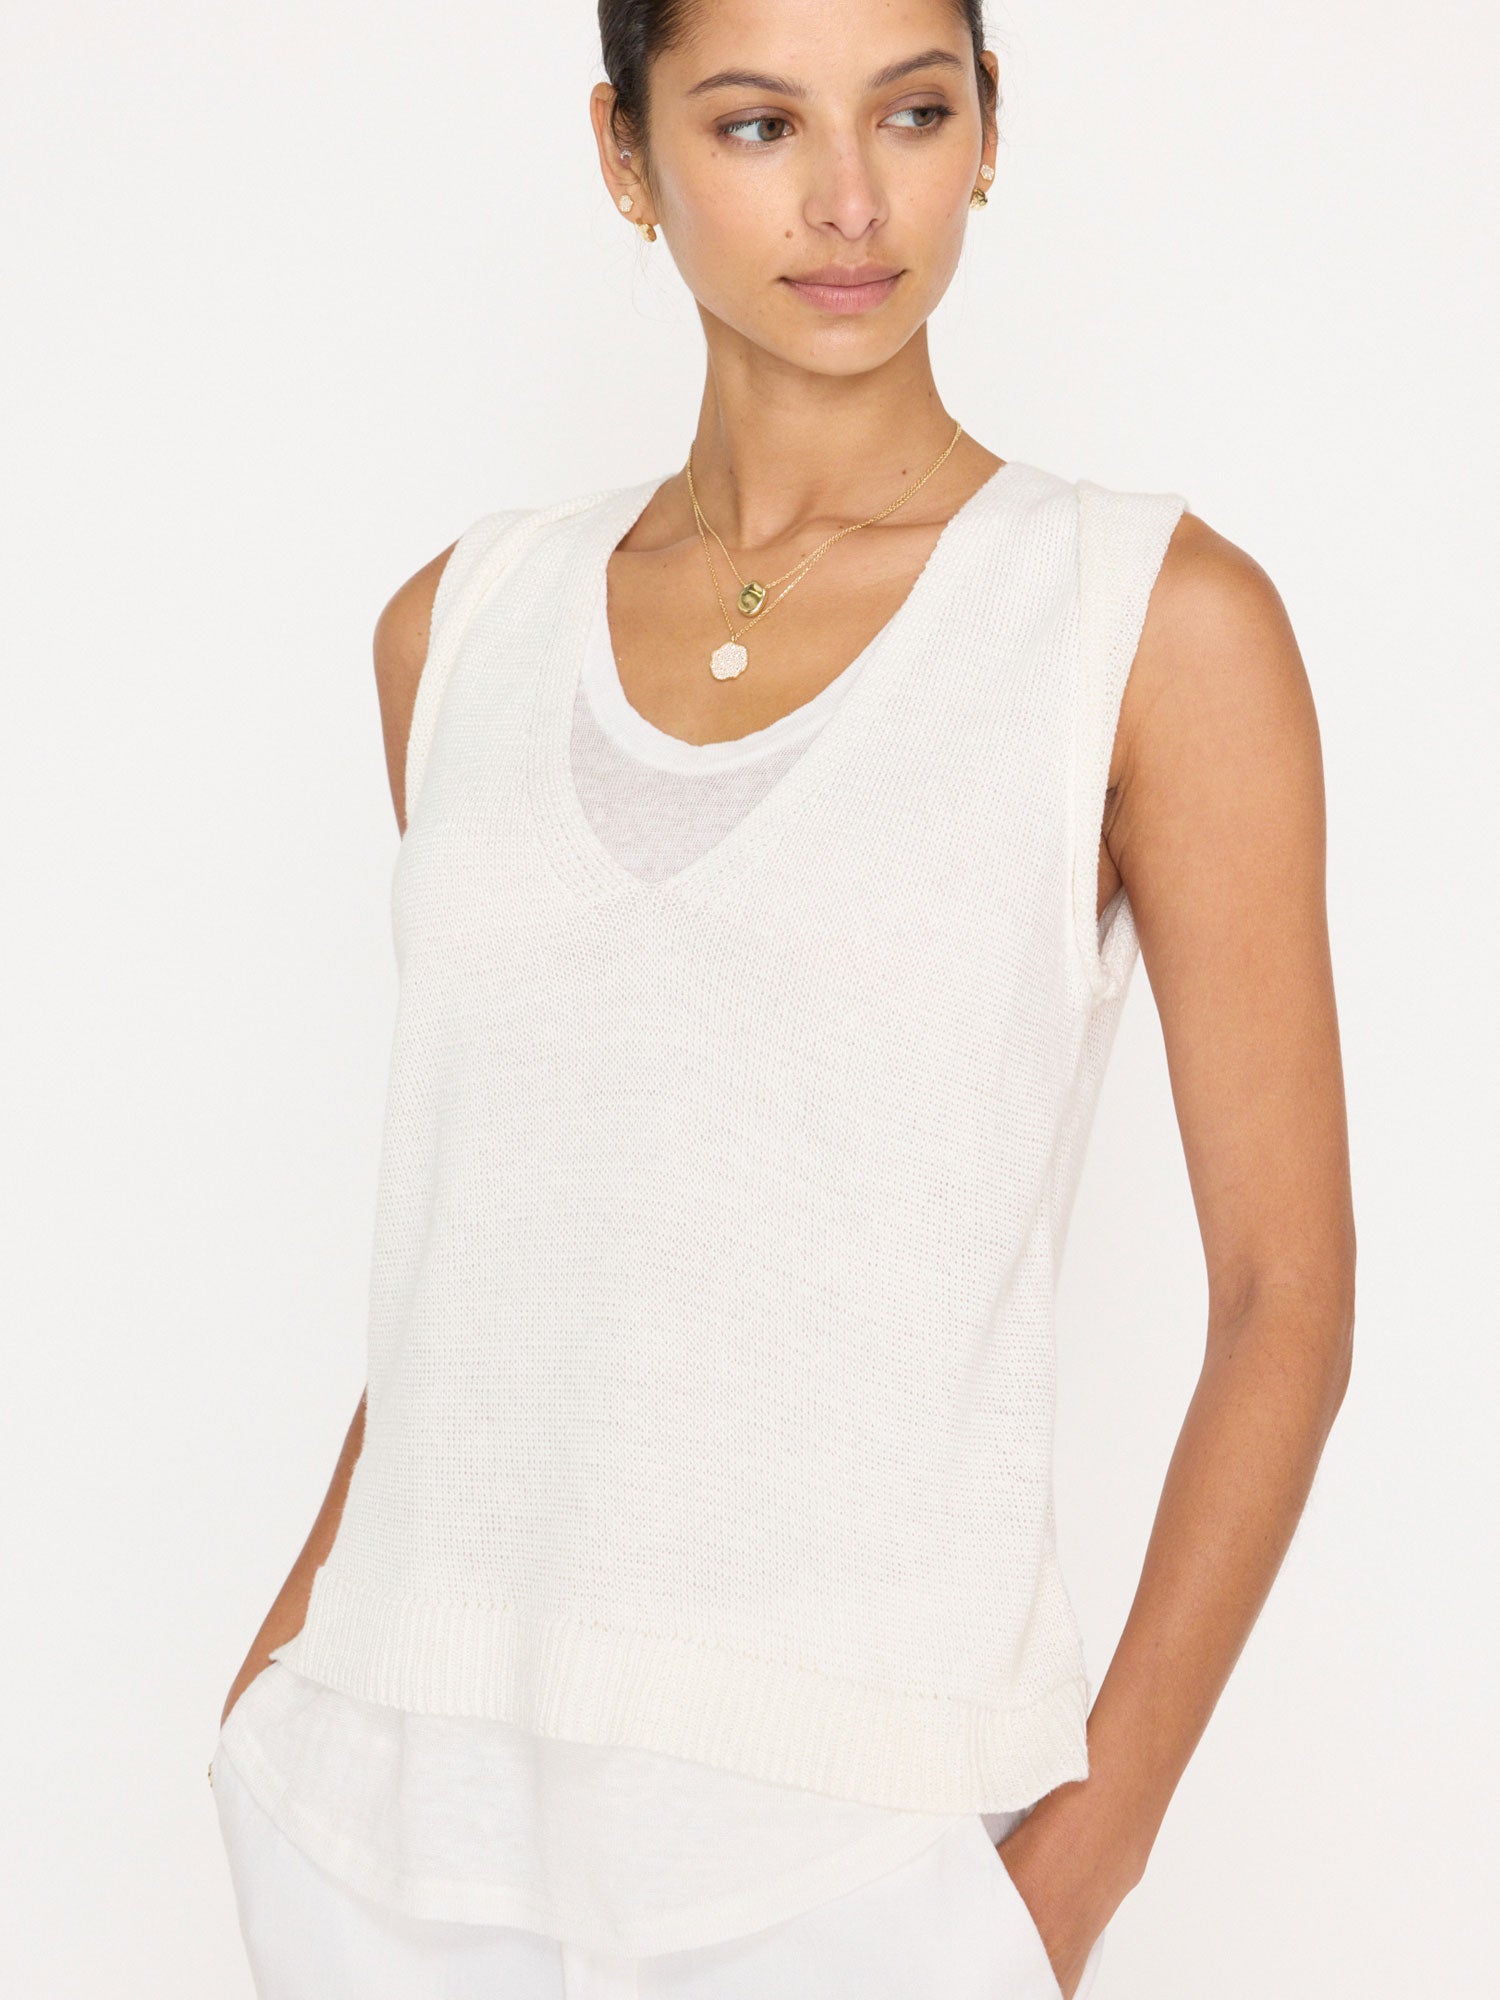 Morrow white layered V-neck tank top front view 2